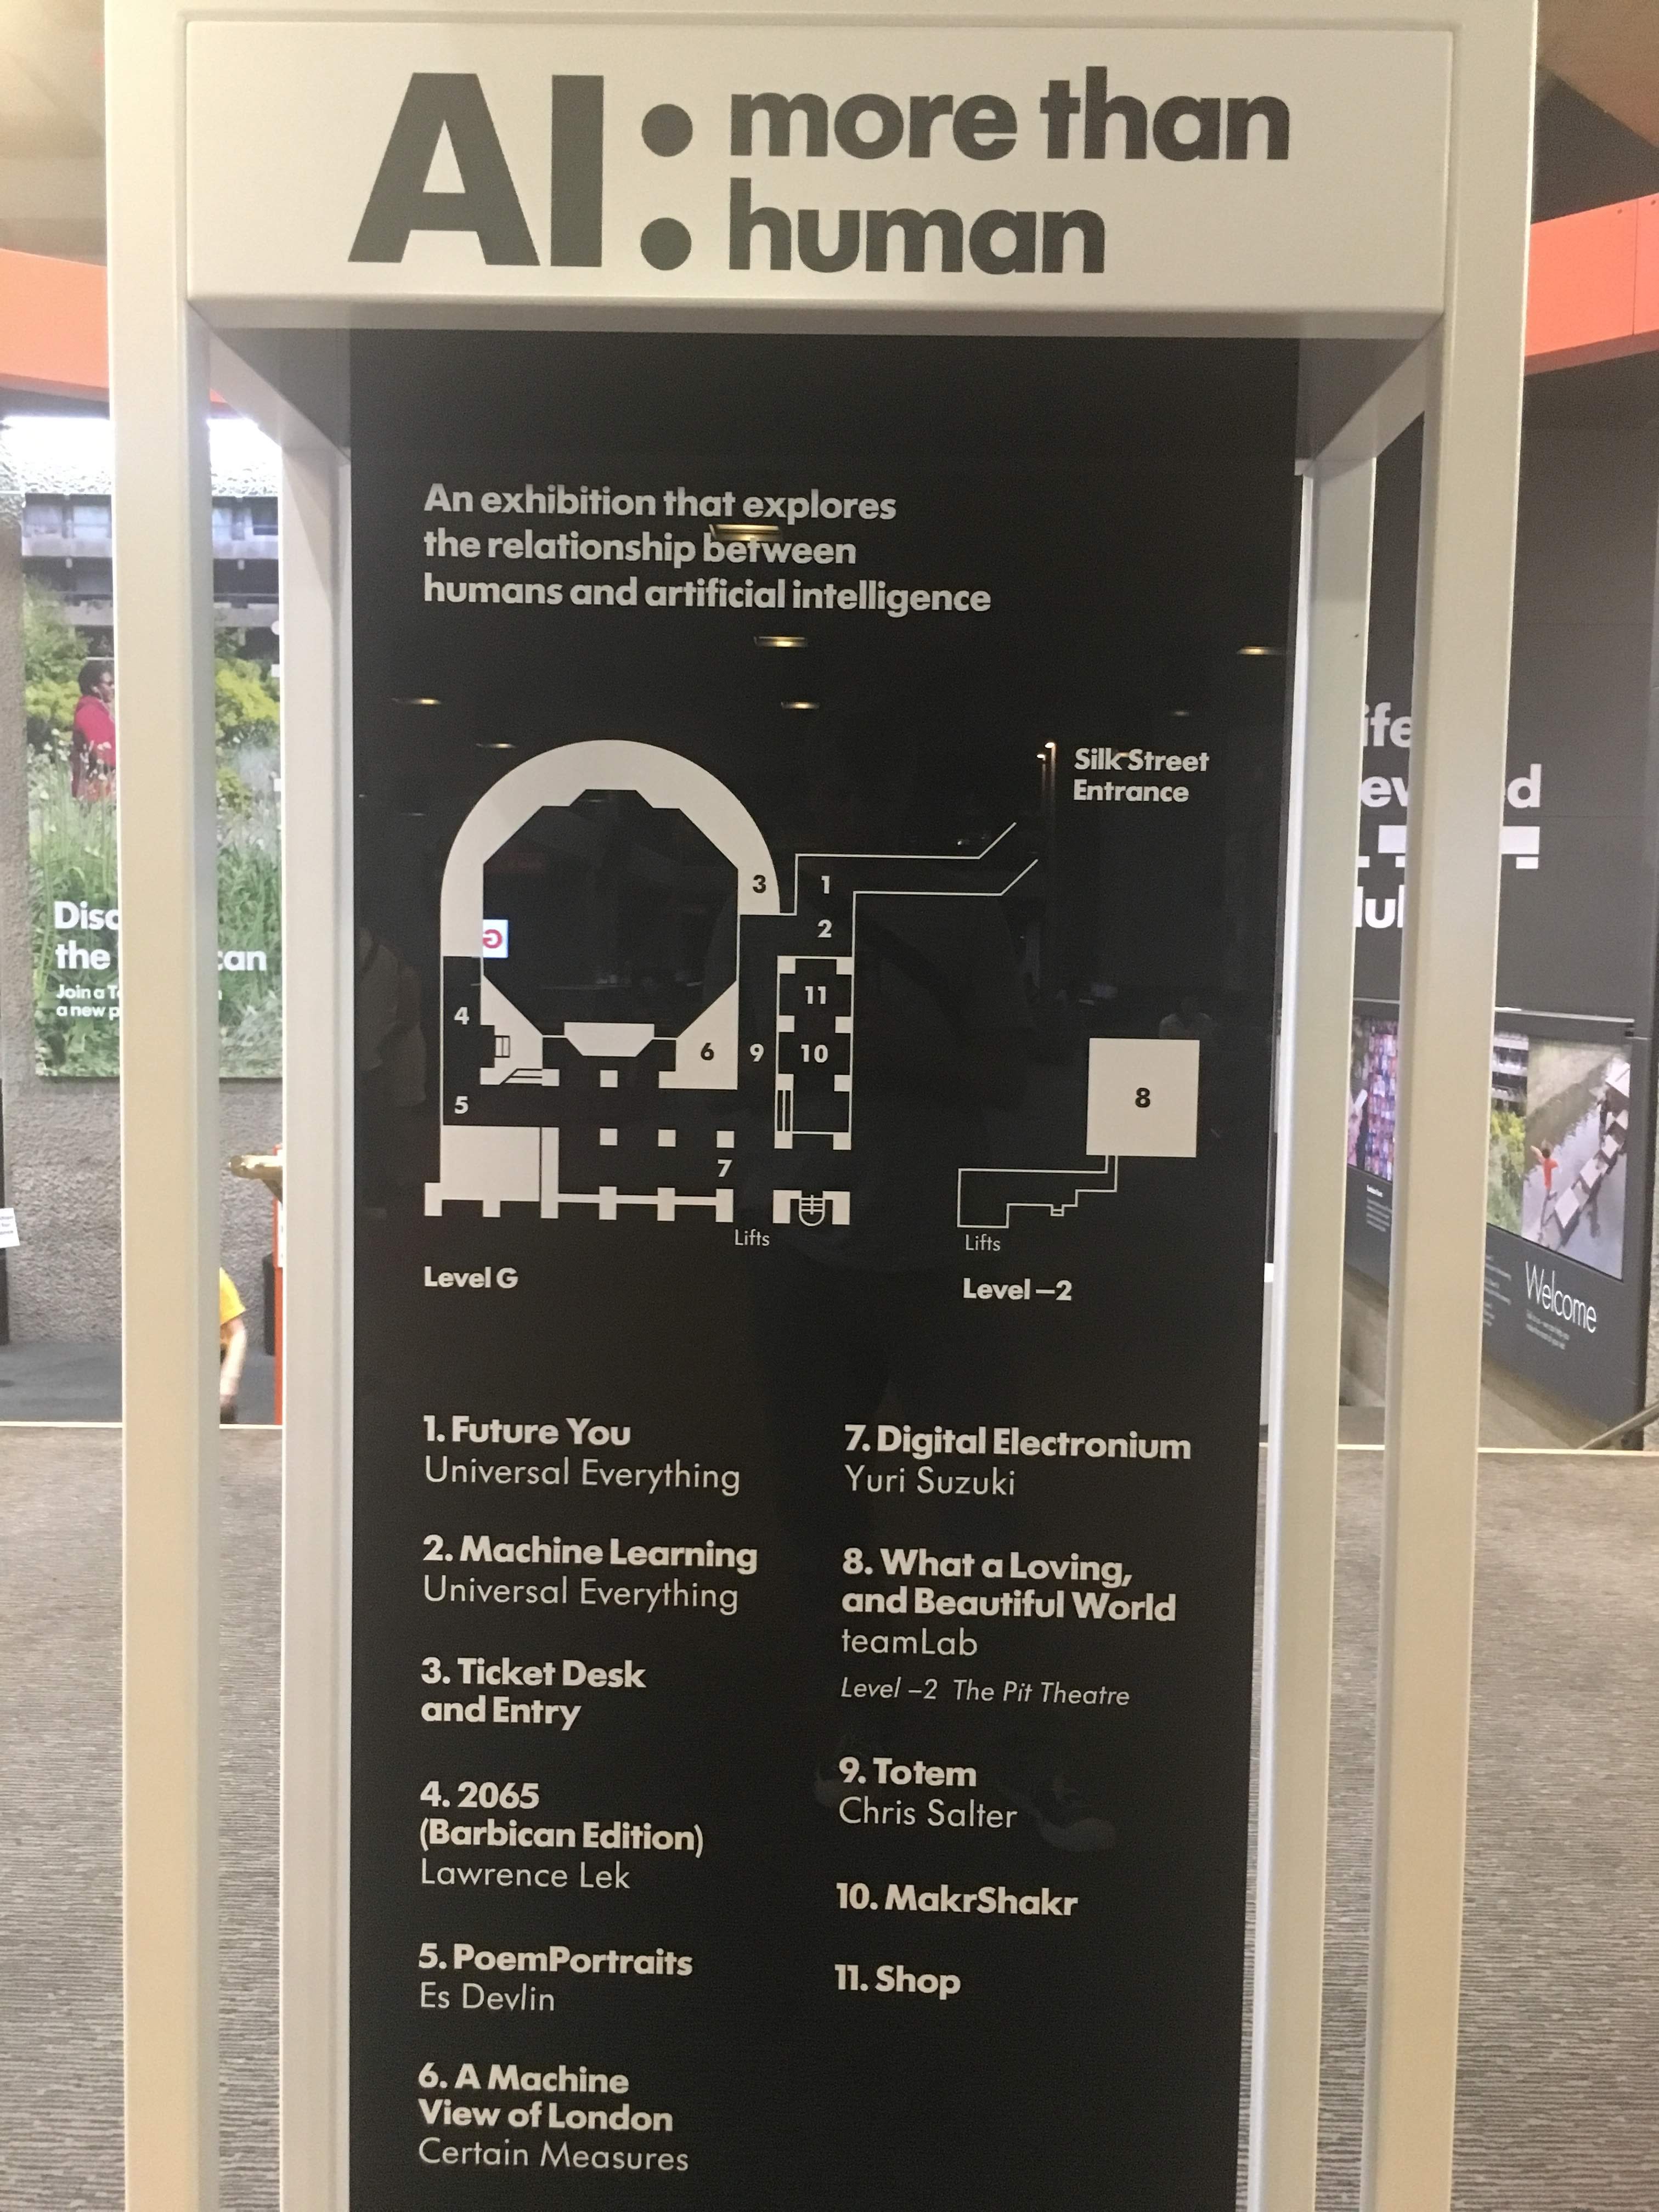 Wayfinding to AI: More than Human installations